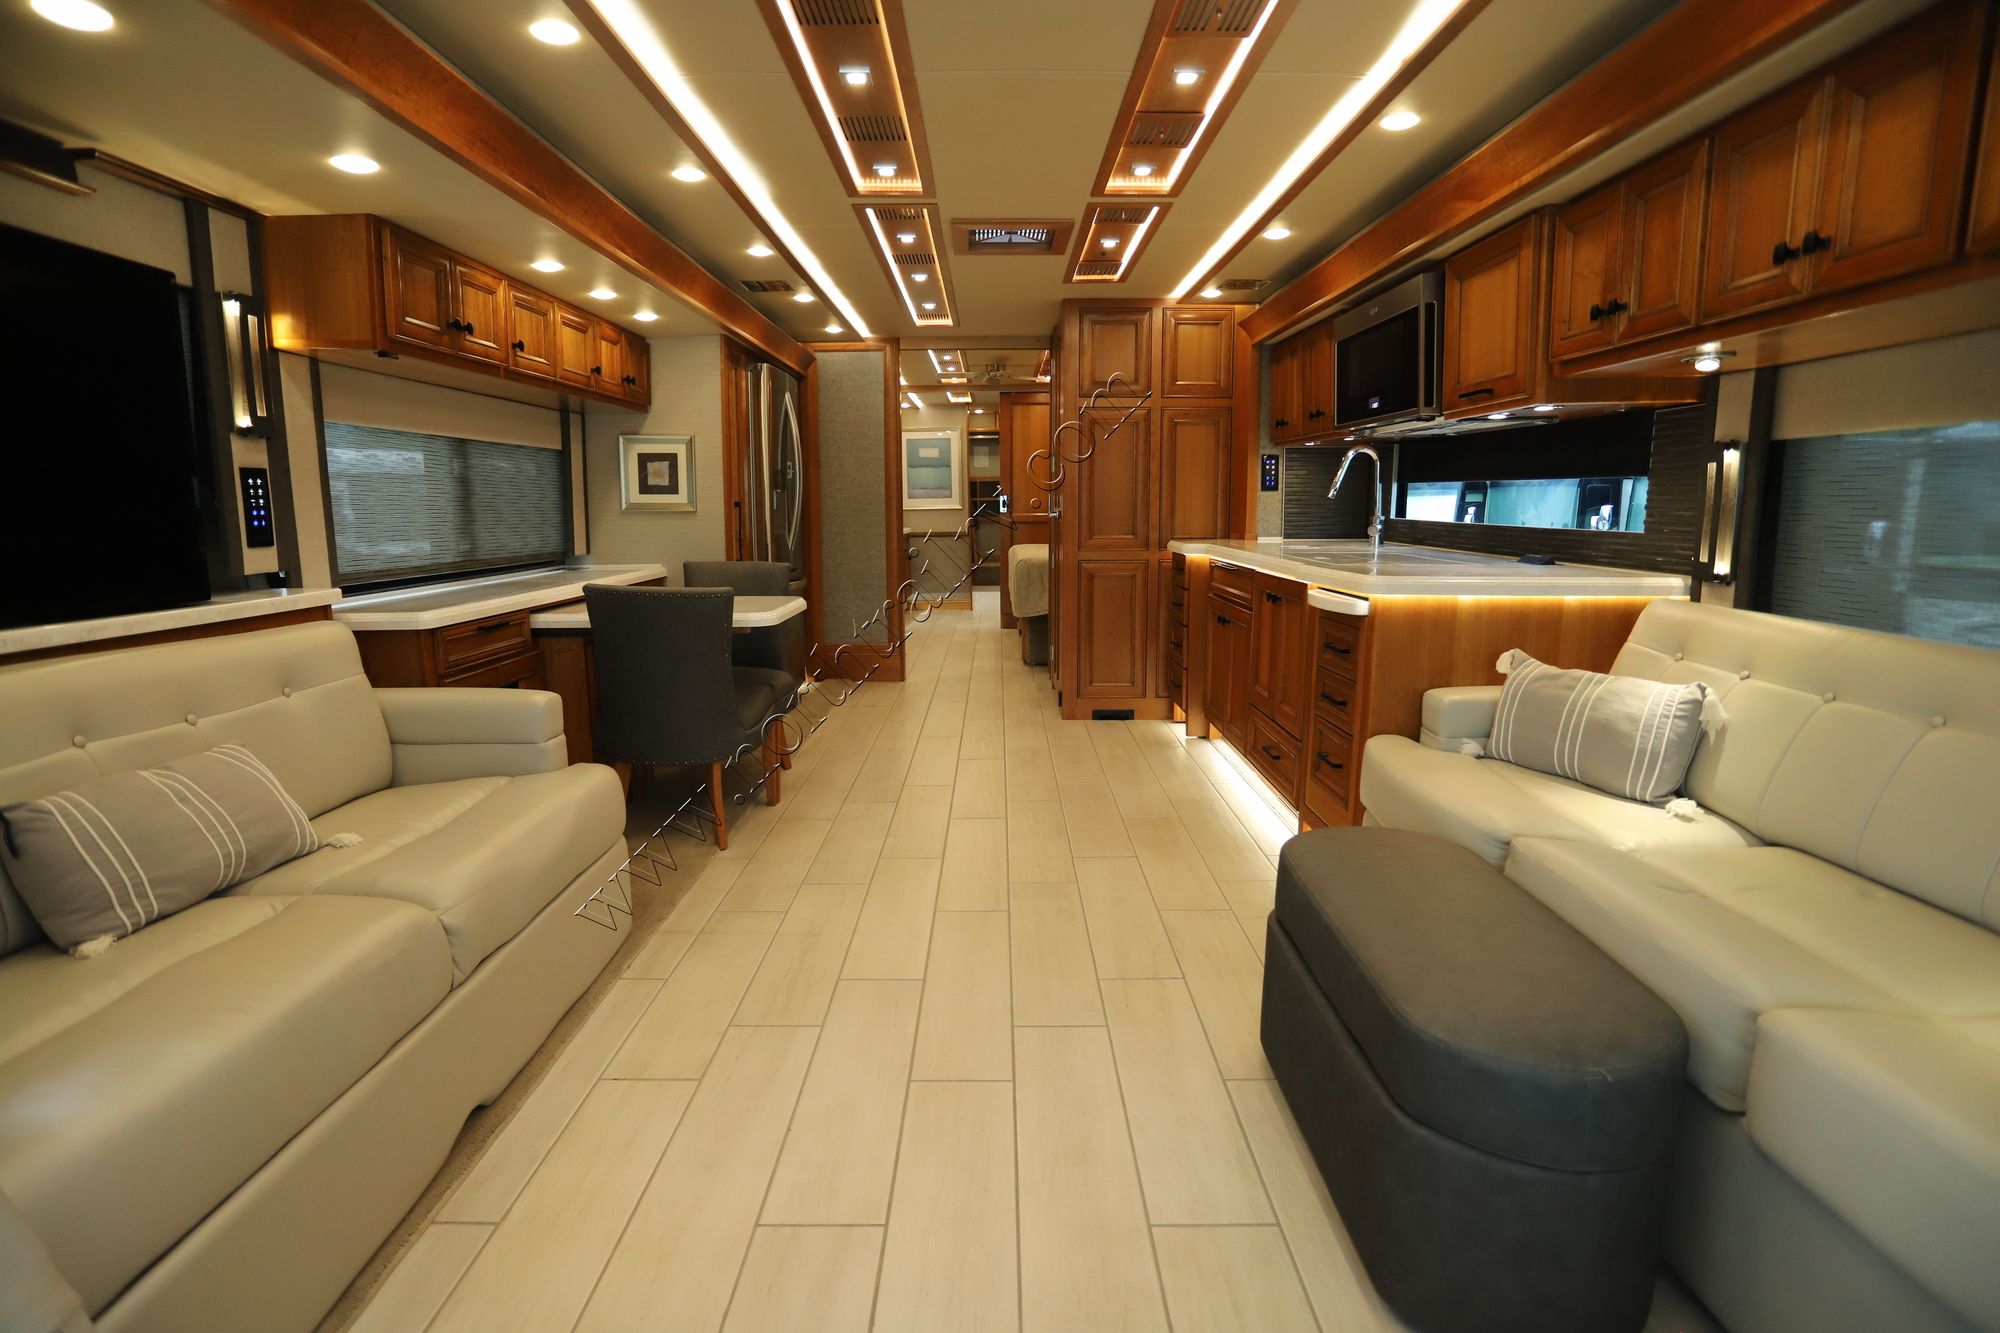 Used 2021 Tiffin Motor Homes Allegro Bus 45OPP Class A  For Sale